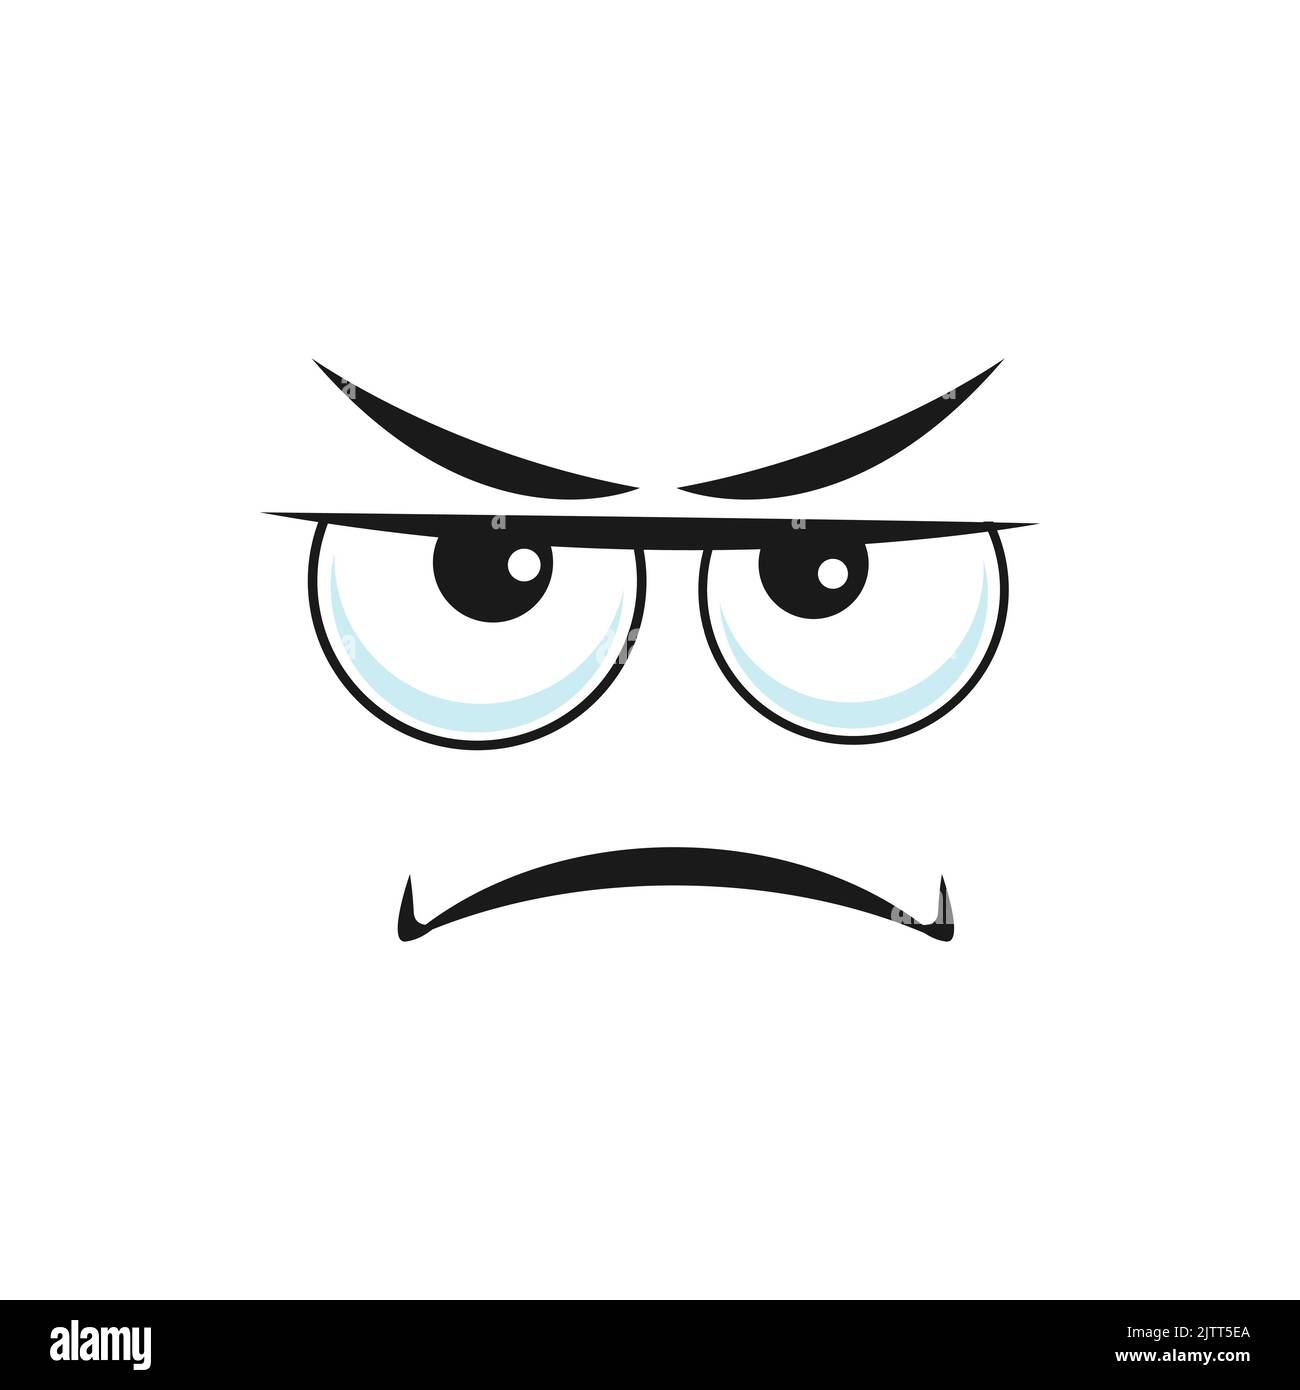 Cartoon face, vector displeased emoji with squinted eyes look sullenly and closed mouth with corners curved down. Negative facial expression, sullen feelings isolated on white background Stock Vector